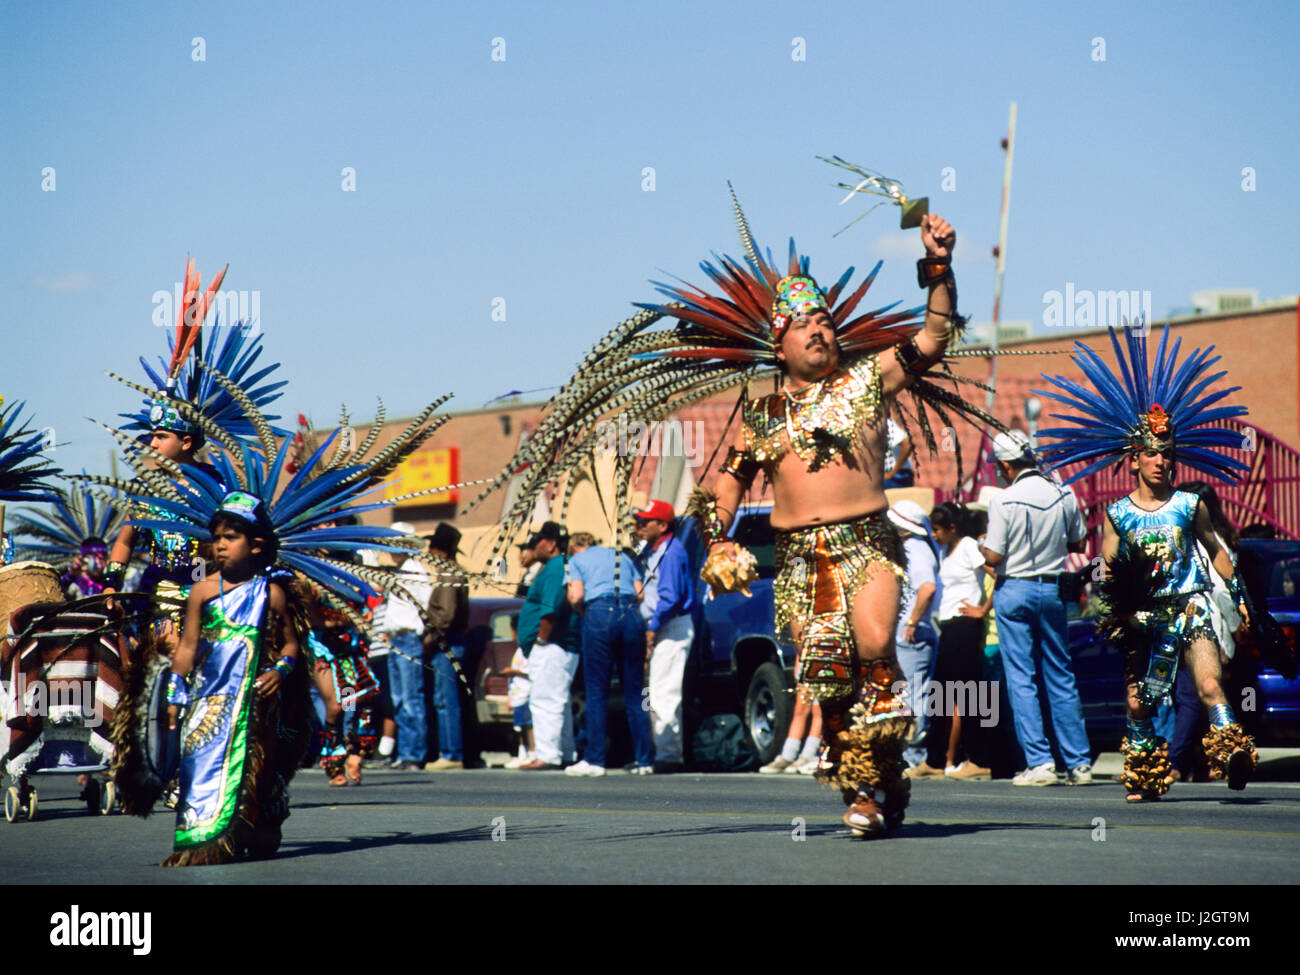 Aztec man with children wear traditional large headdress made from long colorful feathers during an Inter-tribal parade in Gallup New Mexico Stock Photo